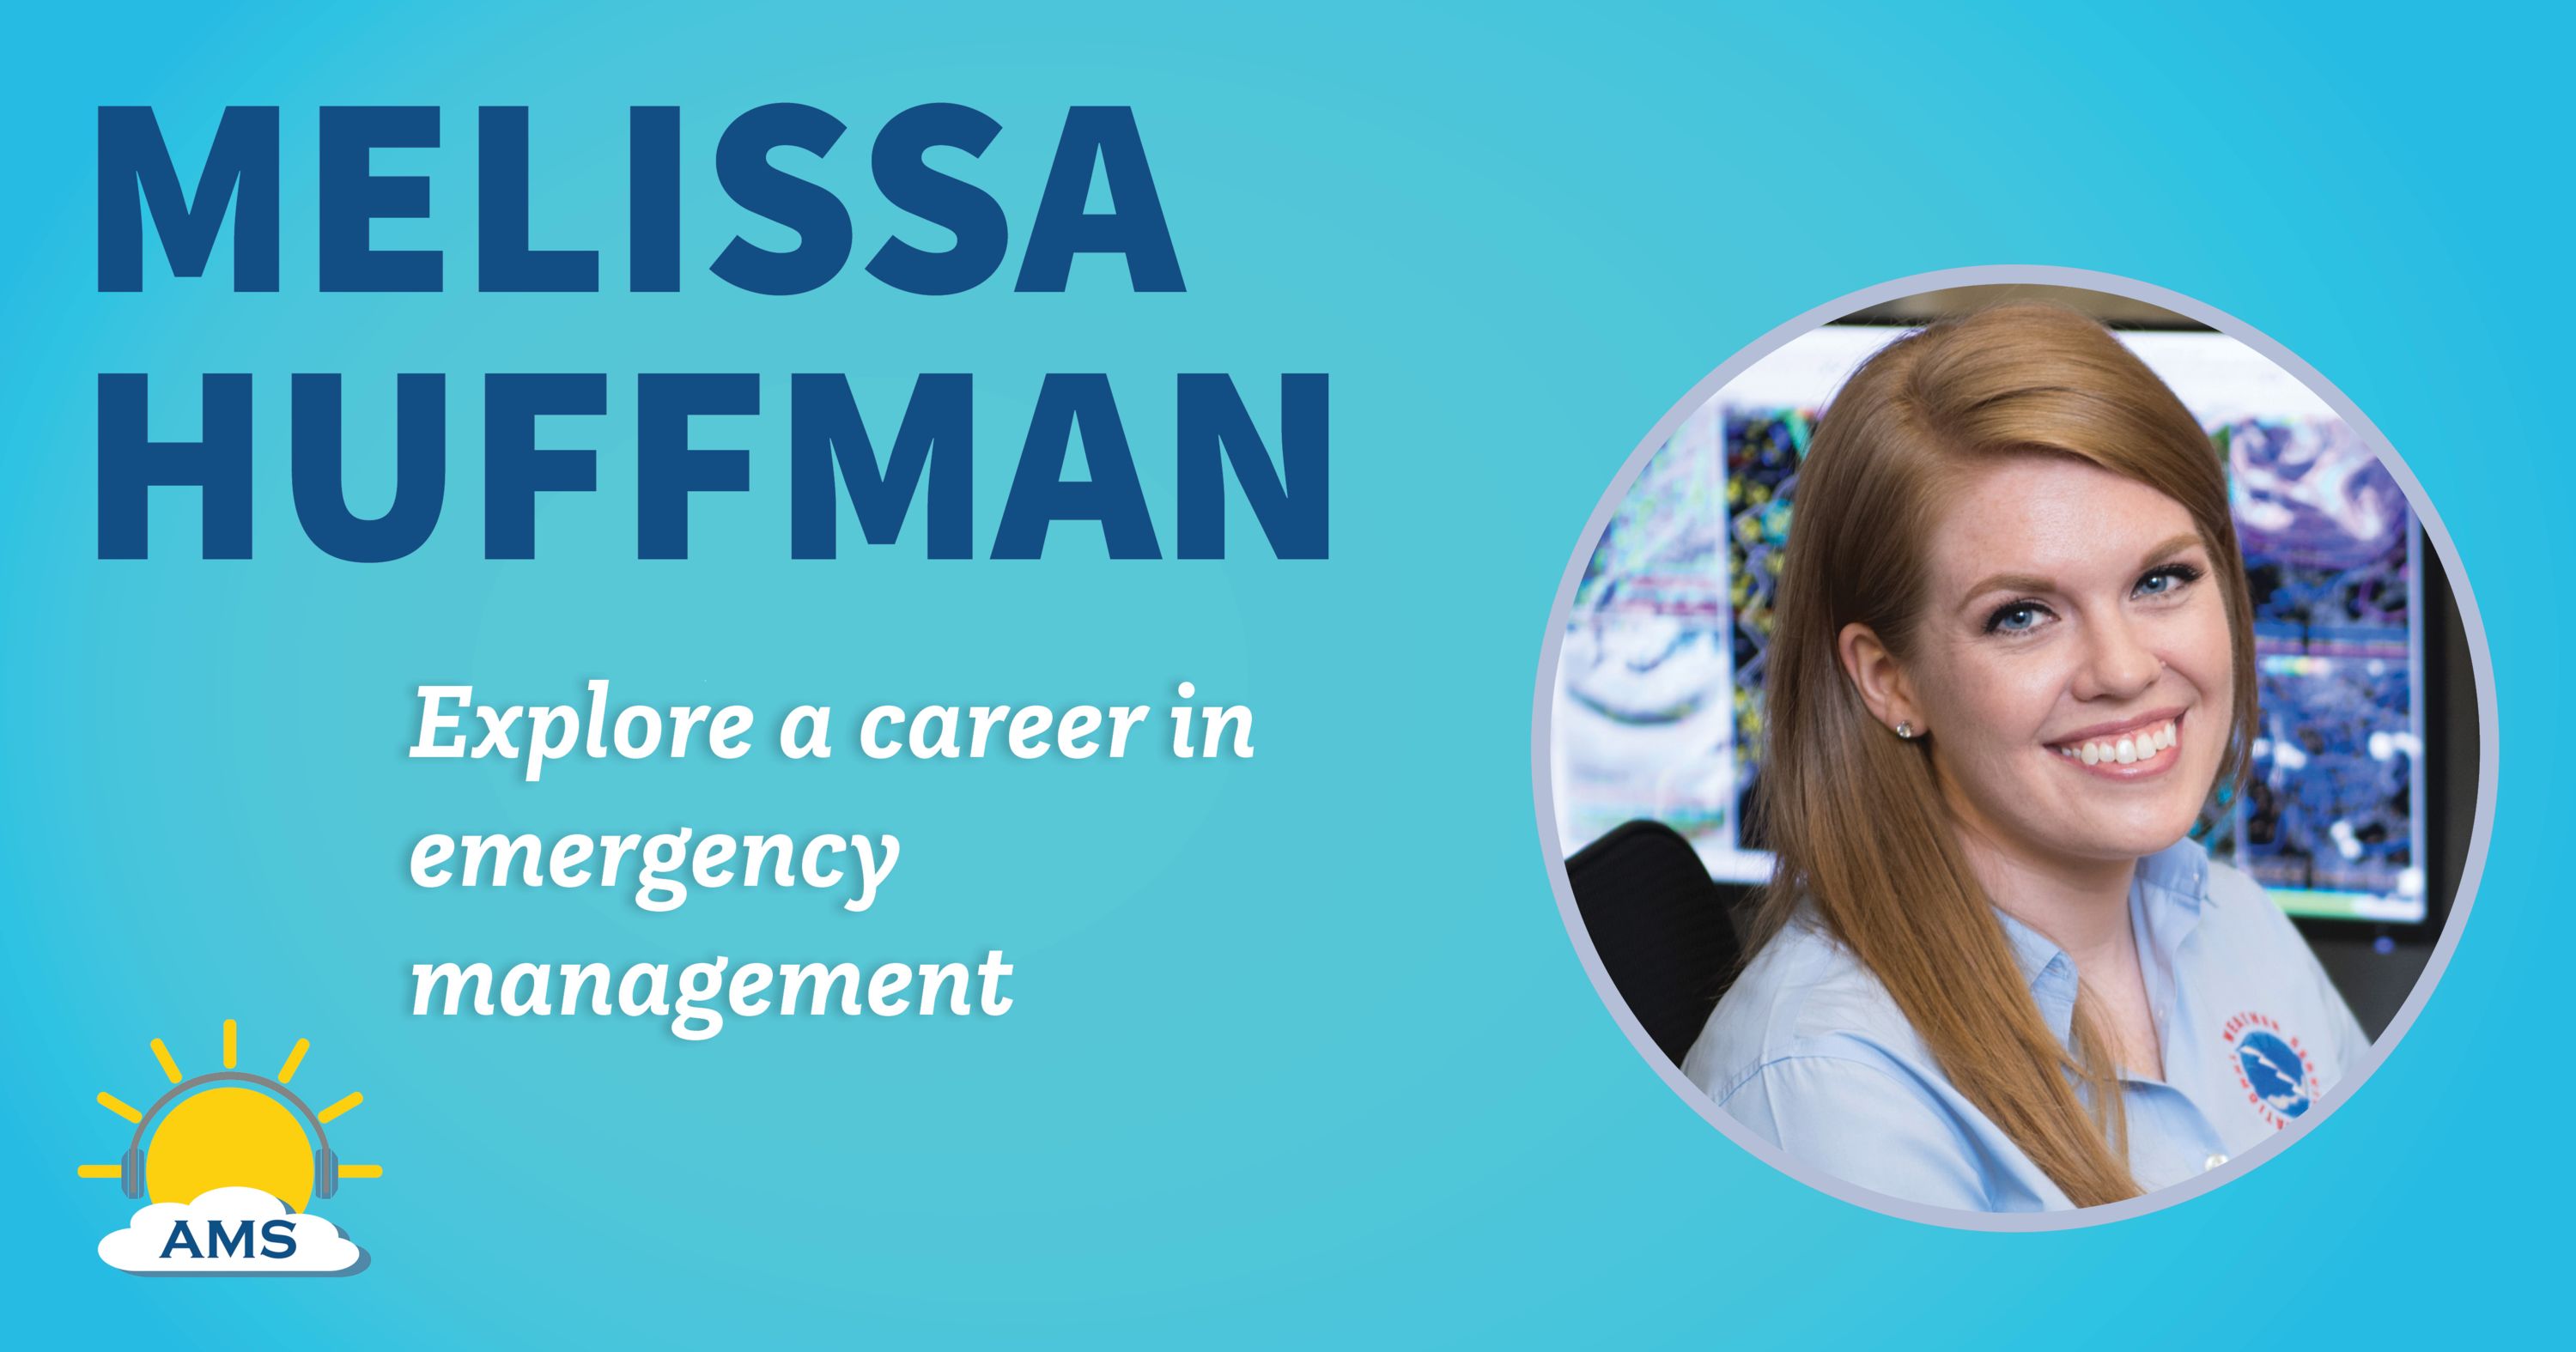 melissa huffman headshot graphic with teaser text that reads &quotexplore a career in emergency management"